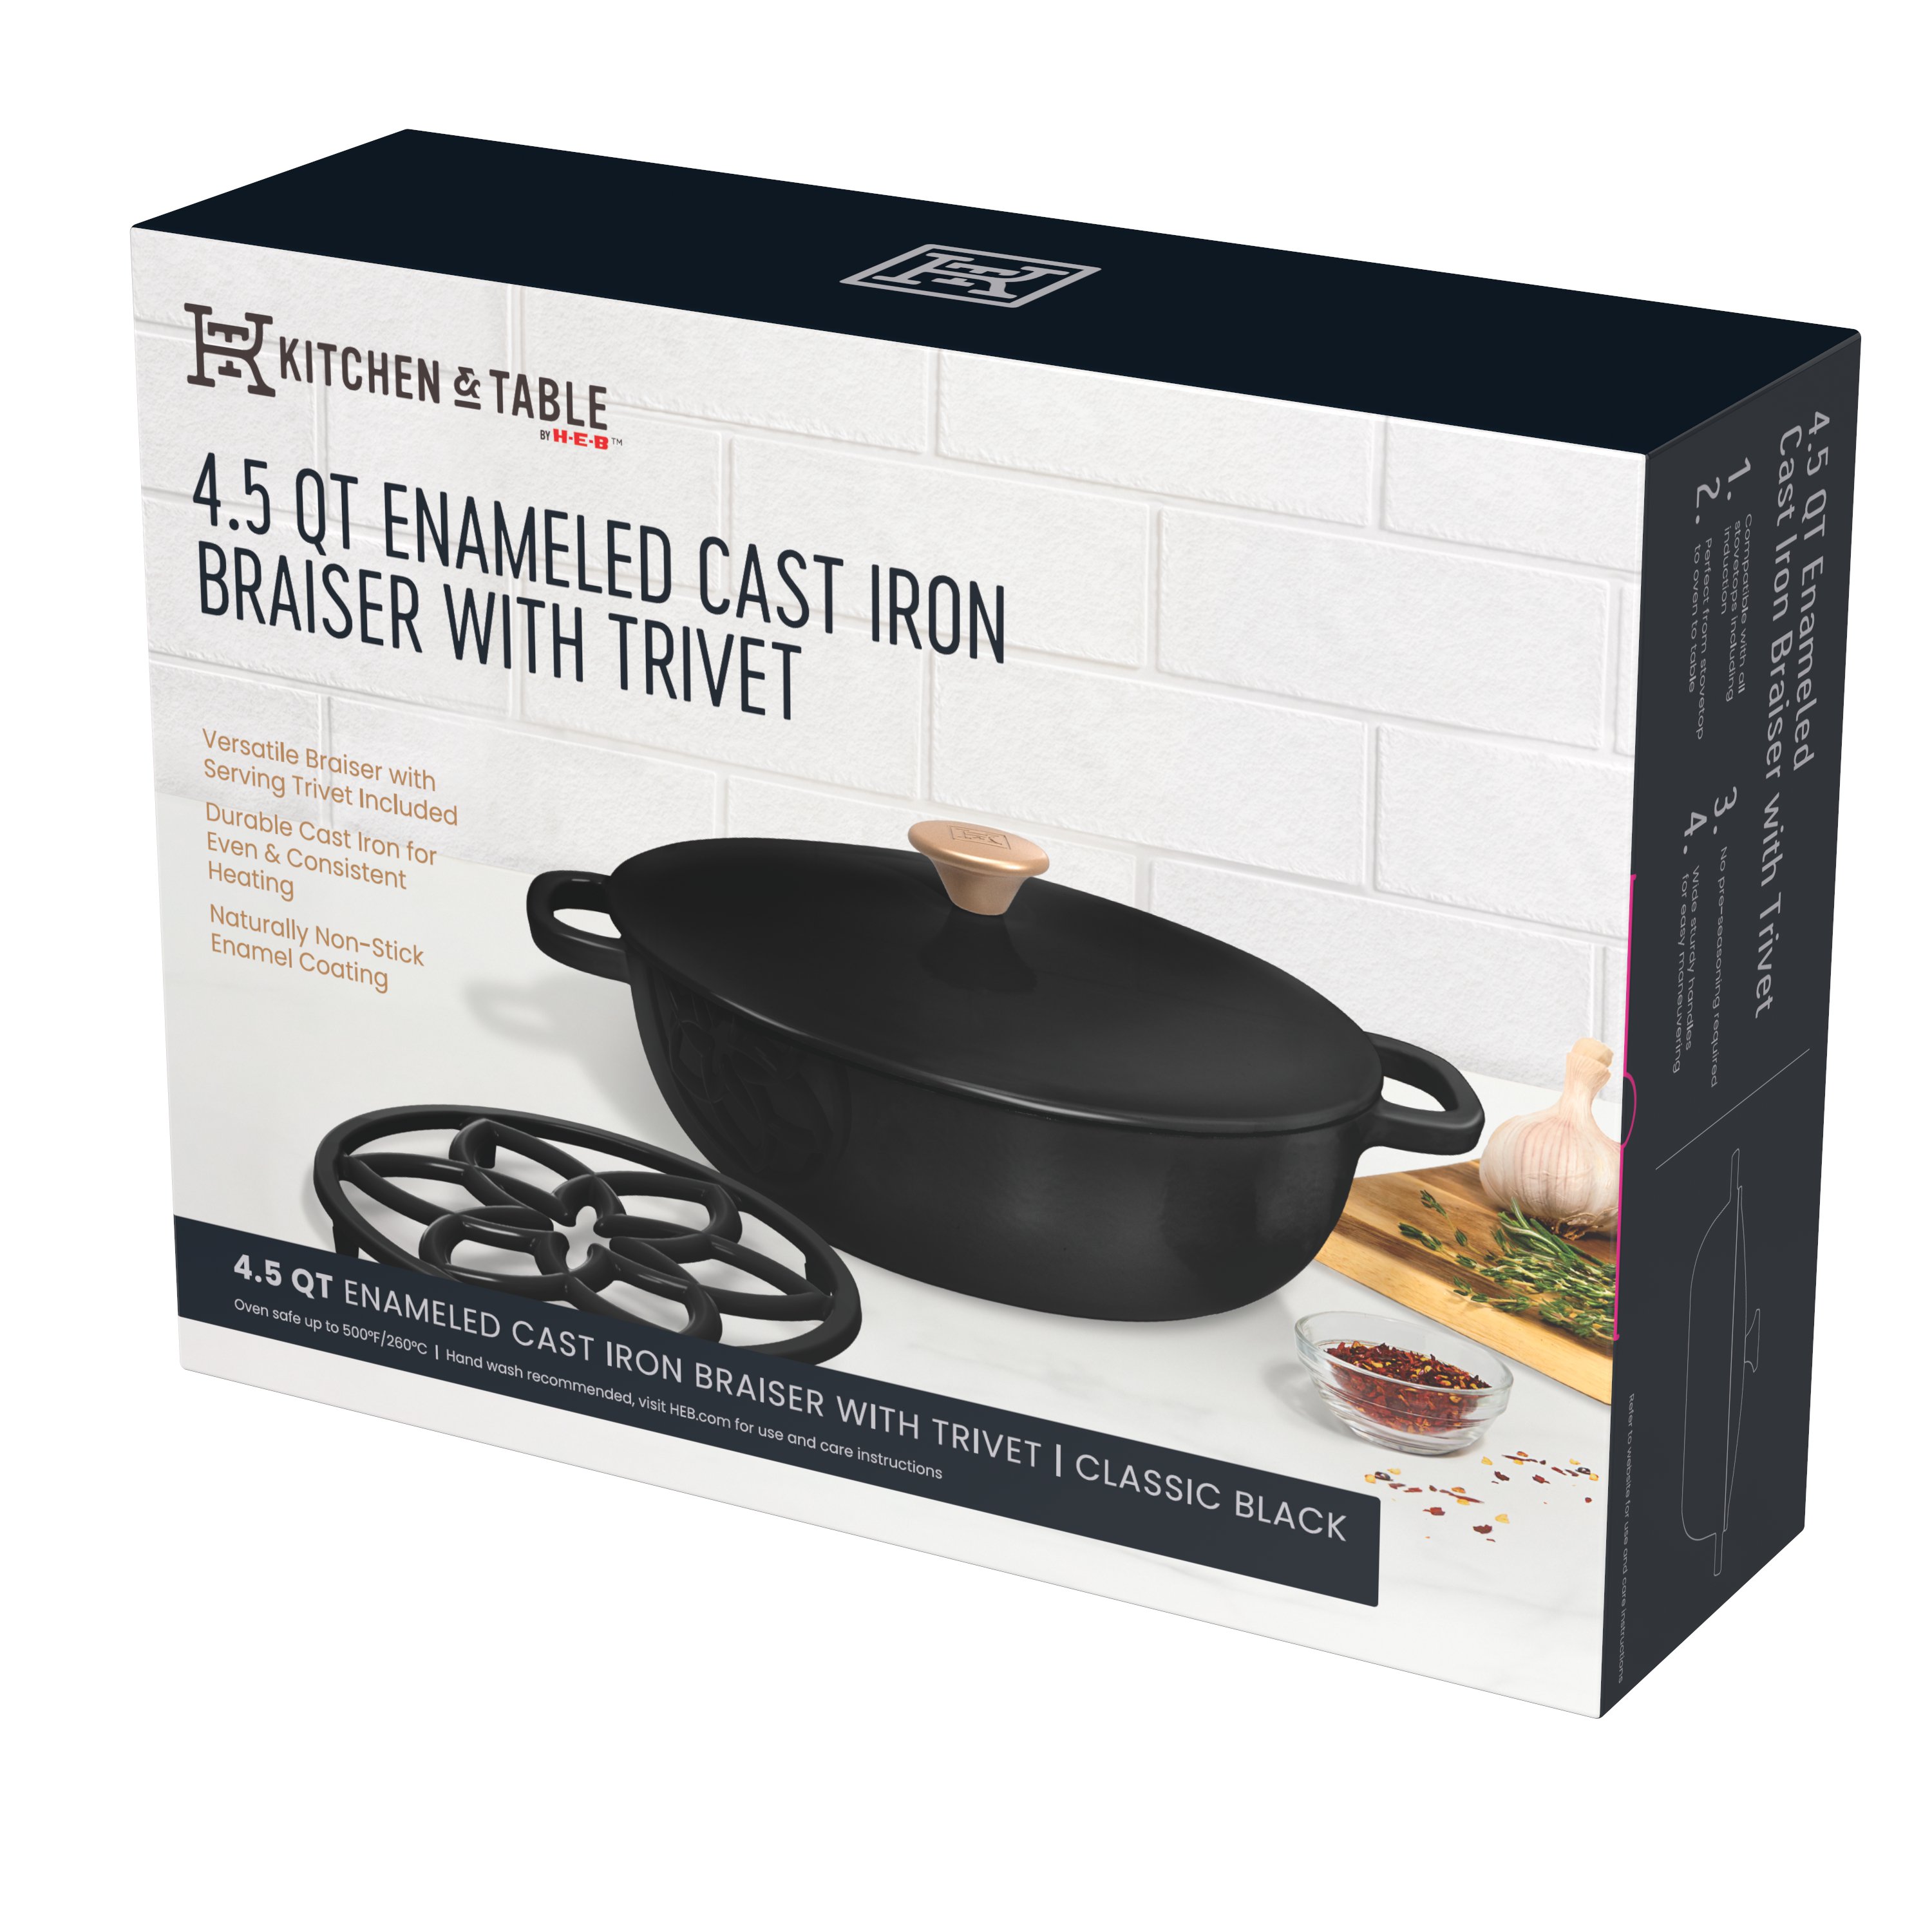 Kitchen & Table by H-E-B Enameled Cast Iron Braiser with Trivet